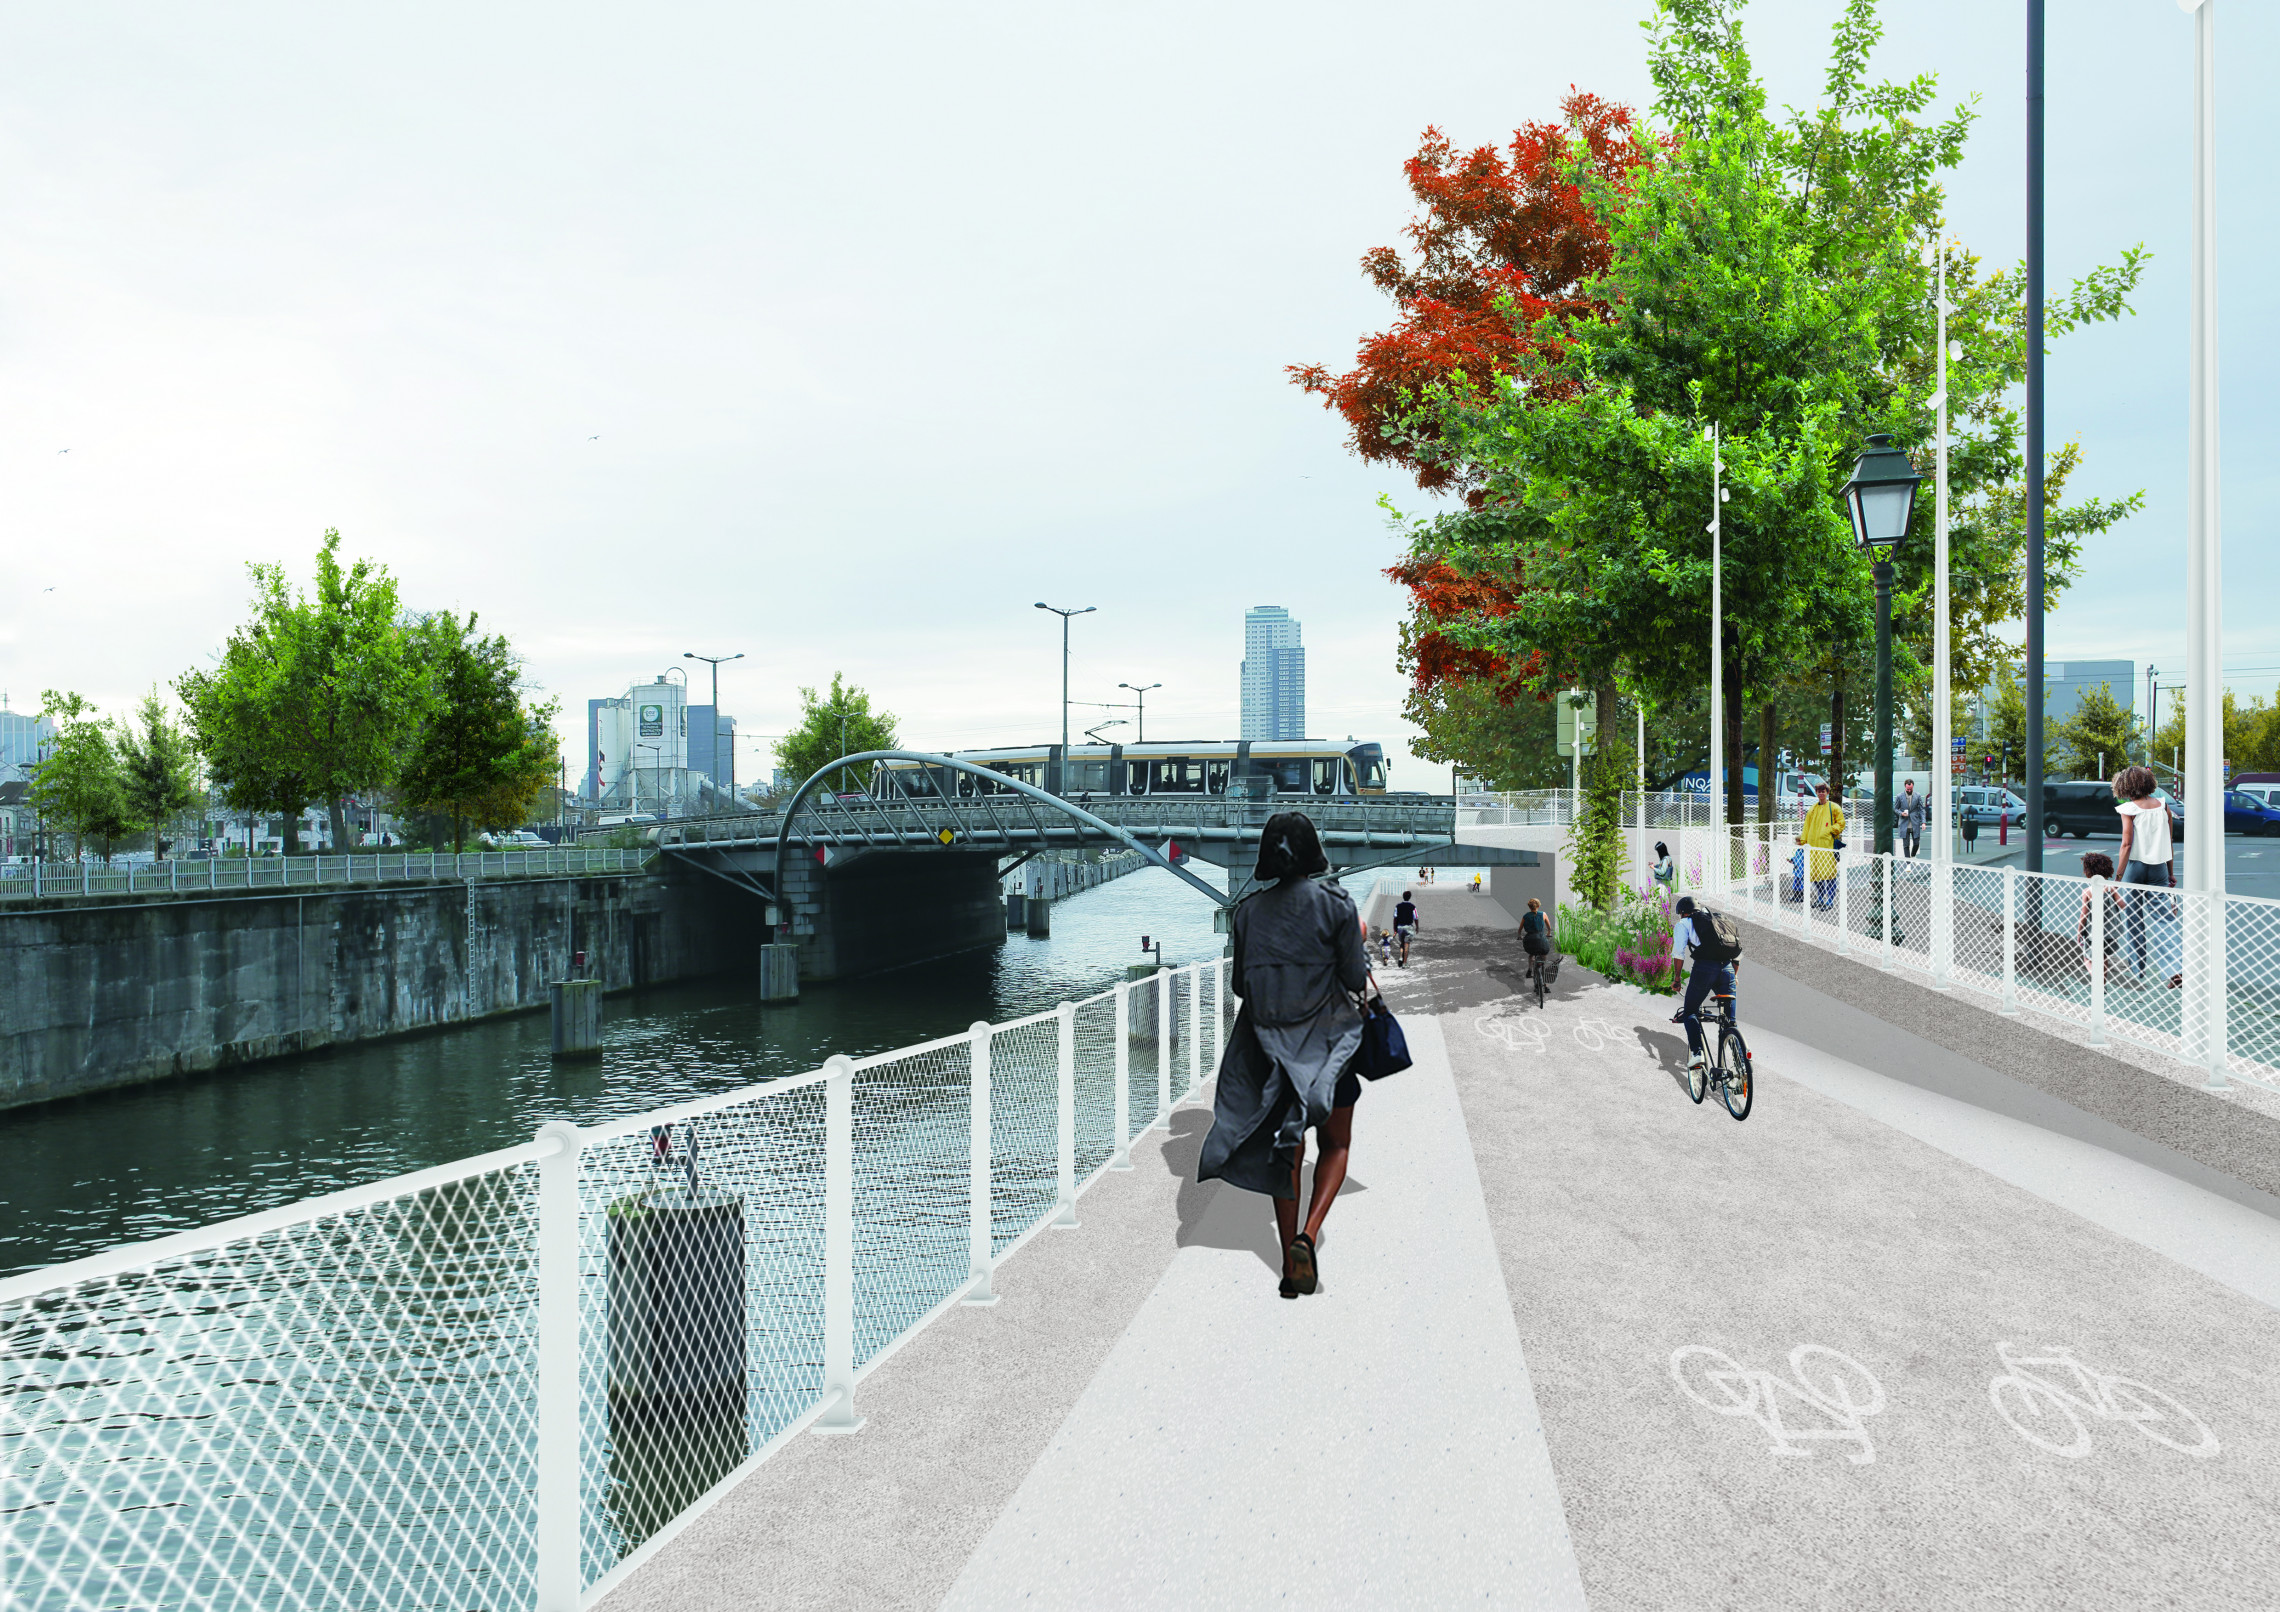 Brussels Region inaugurates missing link in canal cycle route